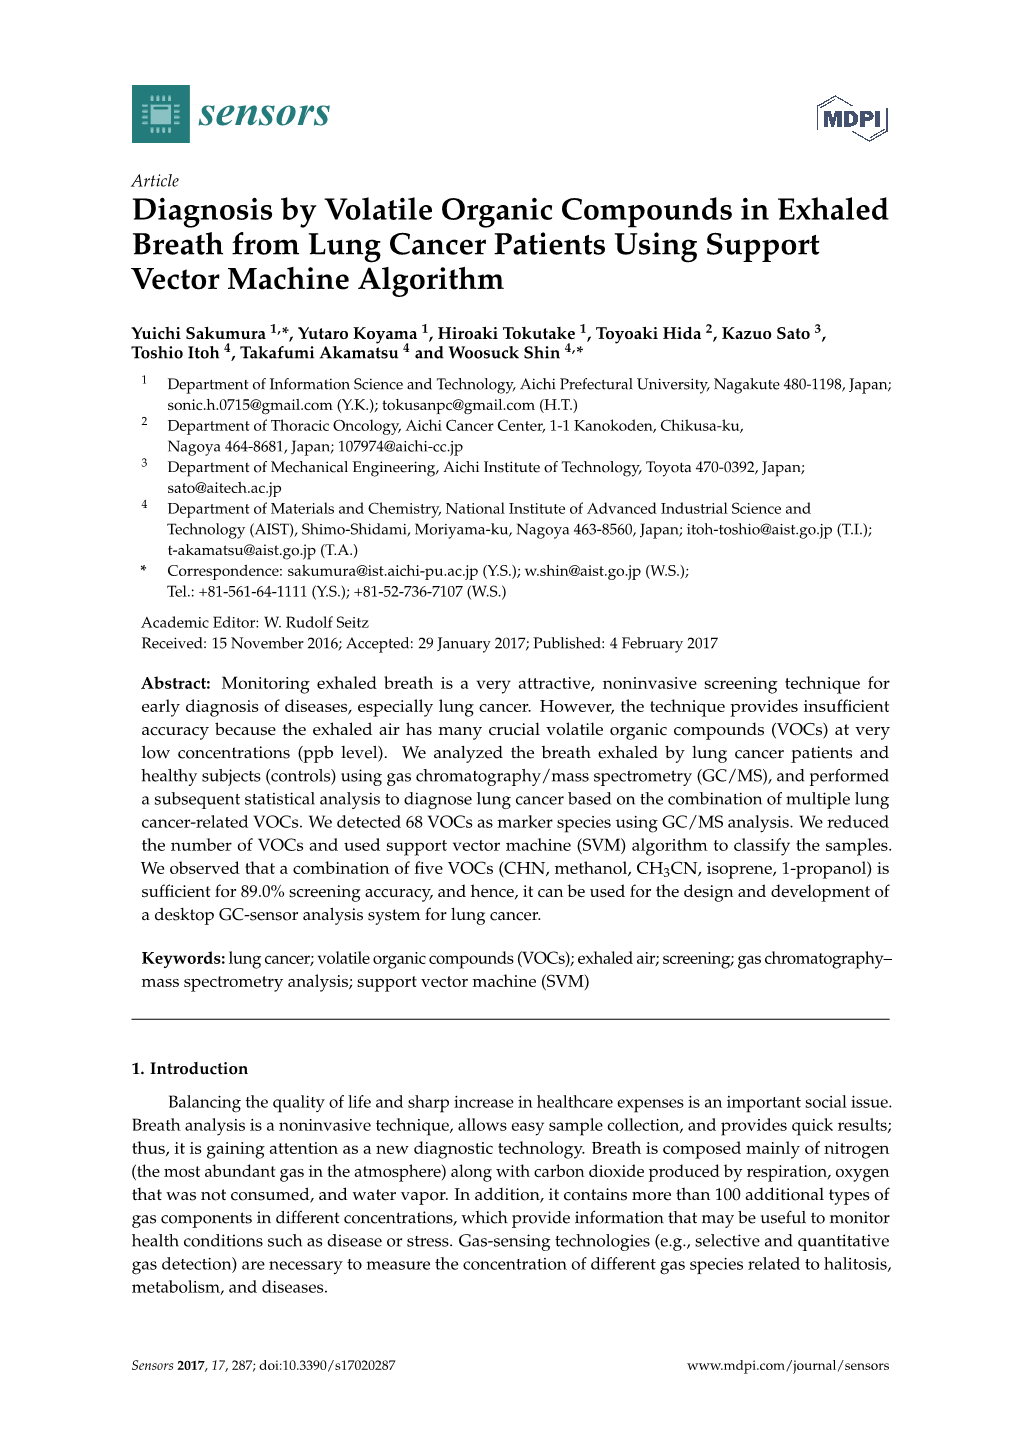 Diagnosis by Volatile Organic Compounds in Exhaled Breath from Lung Cancer Patients Using Support Vector Machine Algorithm